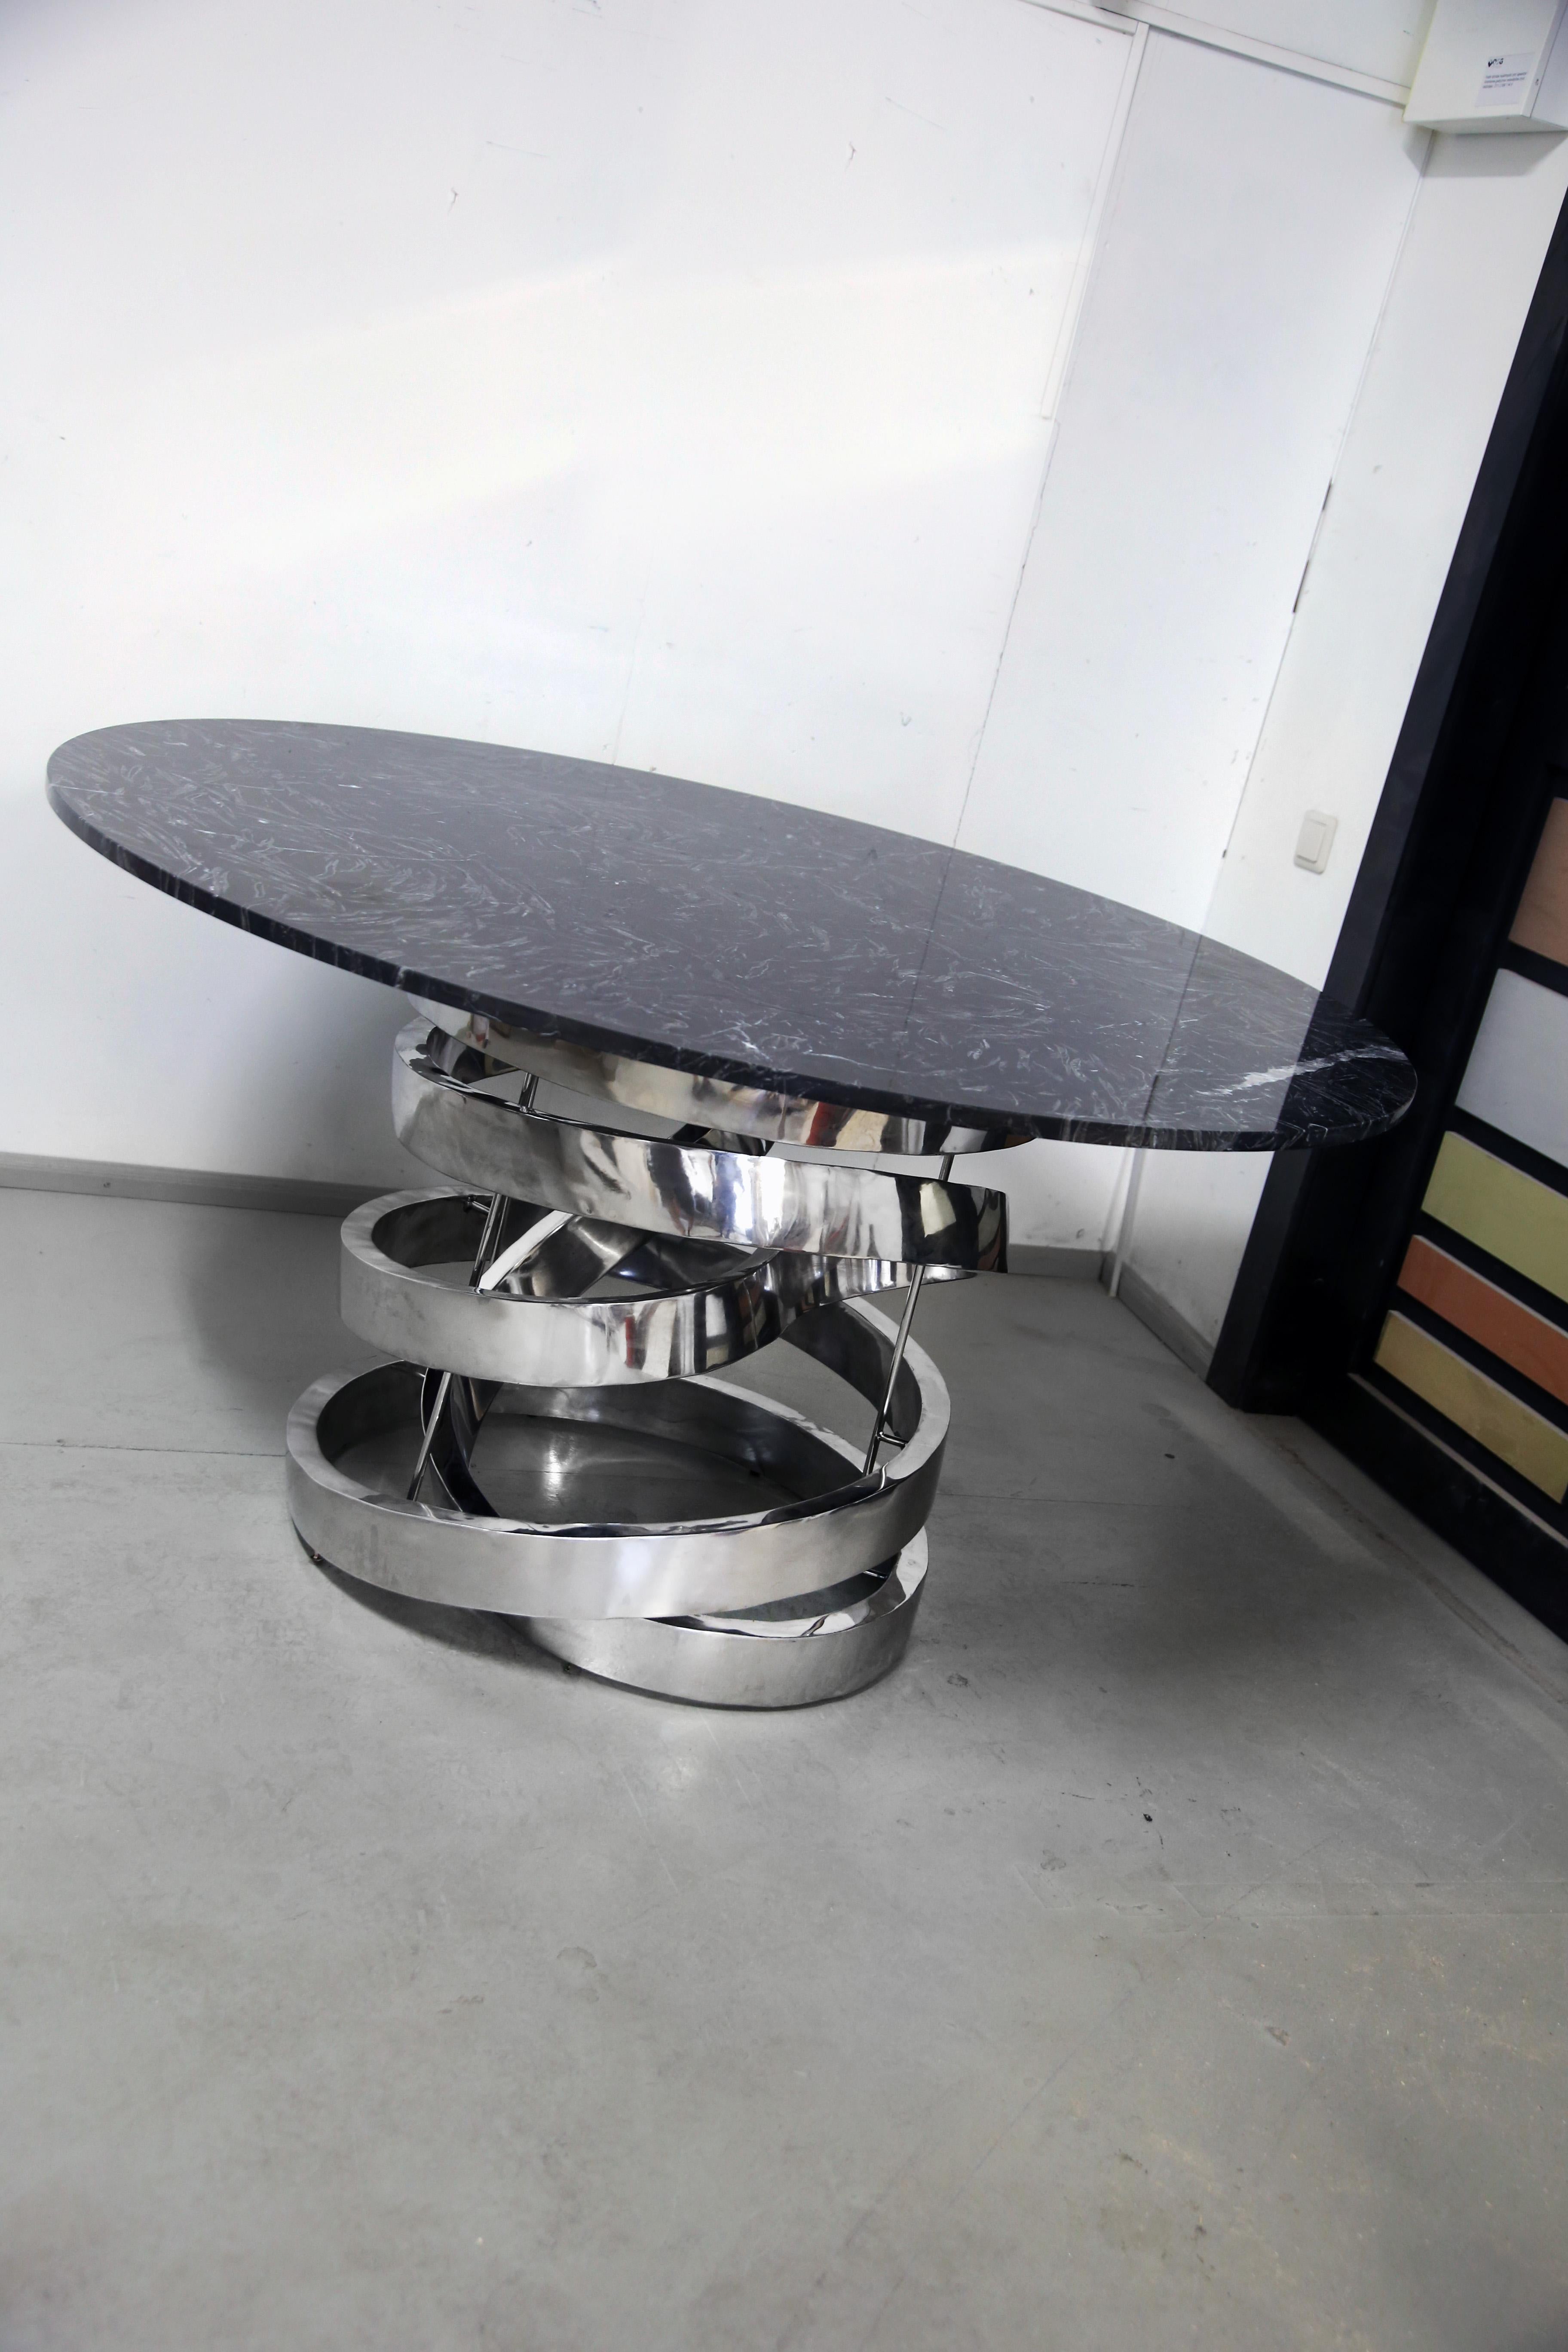 Introducing our stunning round dining table, crafted from premium black nero marble and featuring a polished stainless steel base in a unique and eye-catching shape. This table is not only functional, but also a true work of art that will elevate